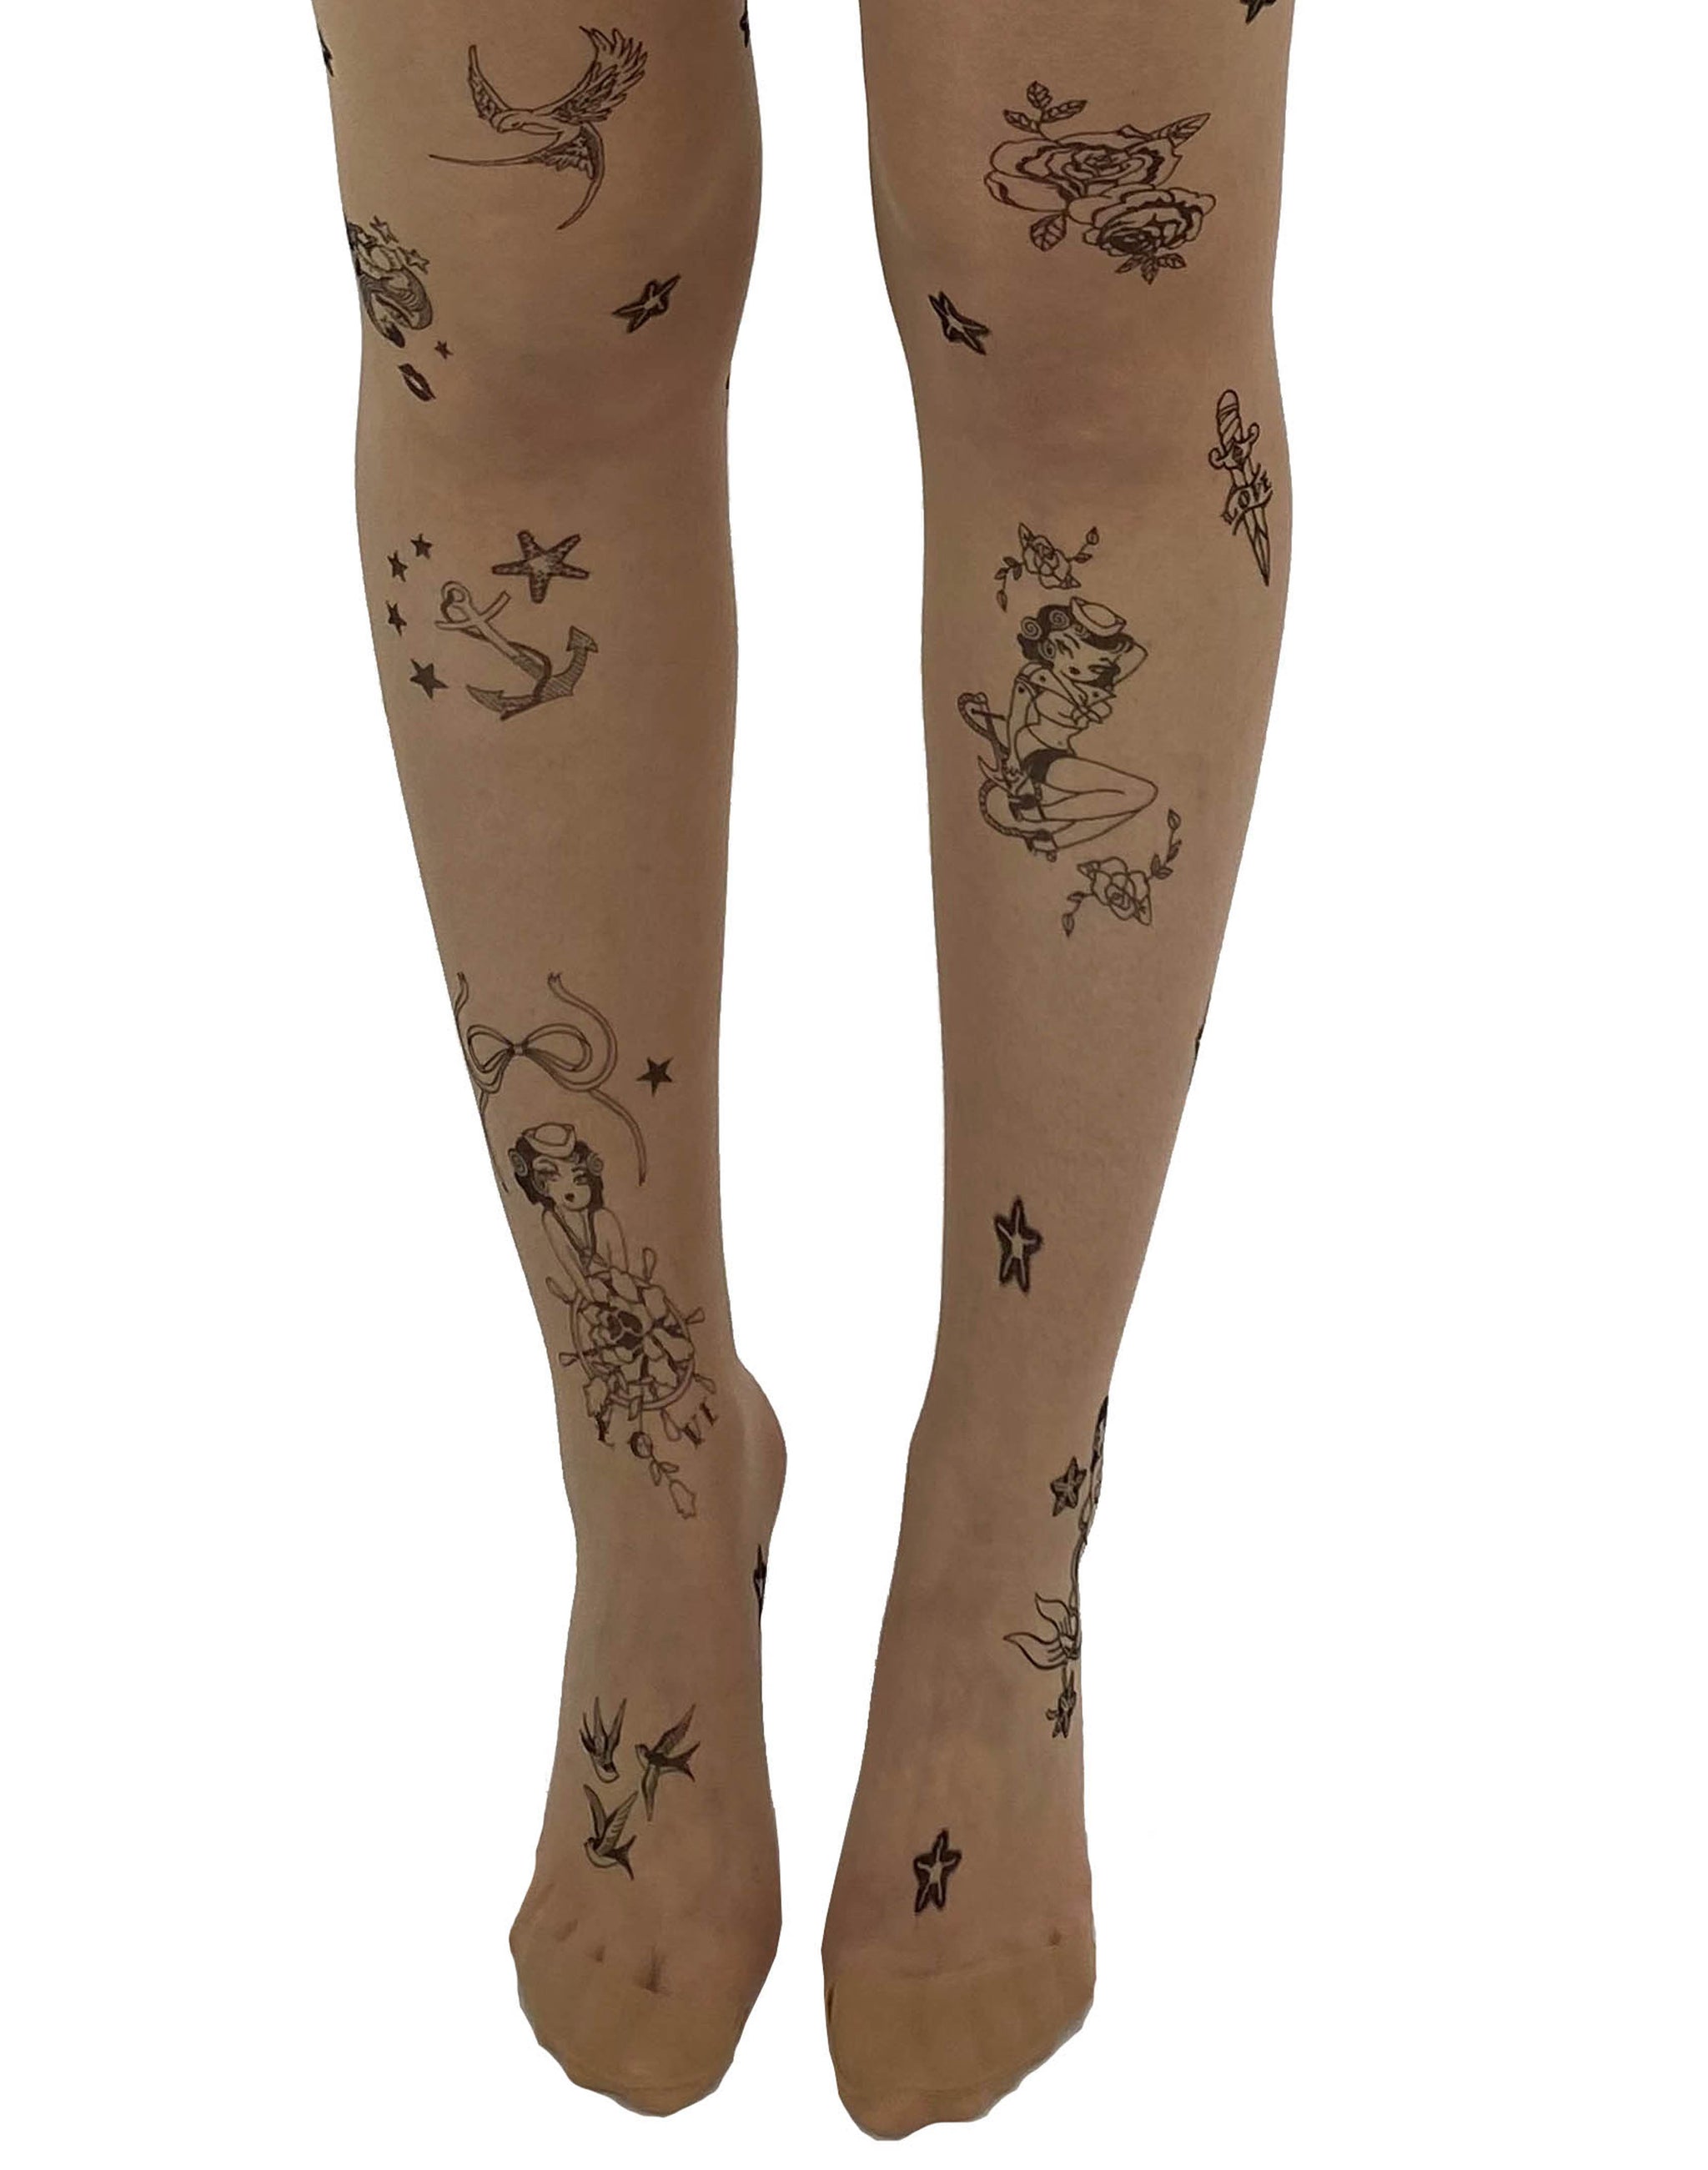 Poison Ivy Tattoo Tights , Green Ivy Leafs Print , Handprinted Womens  Pantyhose , S-XXL Sizes Available , Poison Ivy Printed Tights - Etsy UK |  Ivy tattoo, Tattoo tights, Poison ivy tattoo